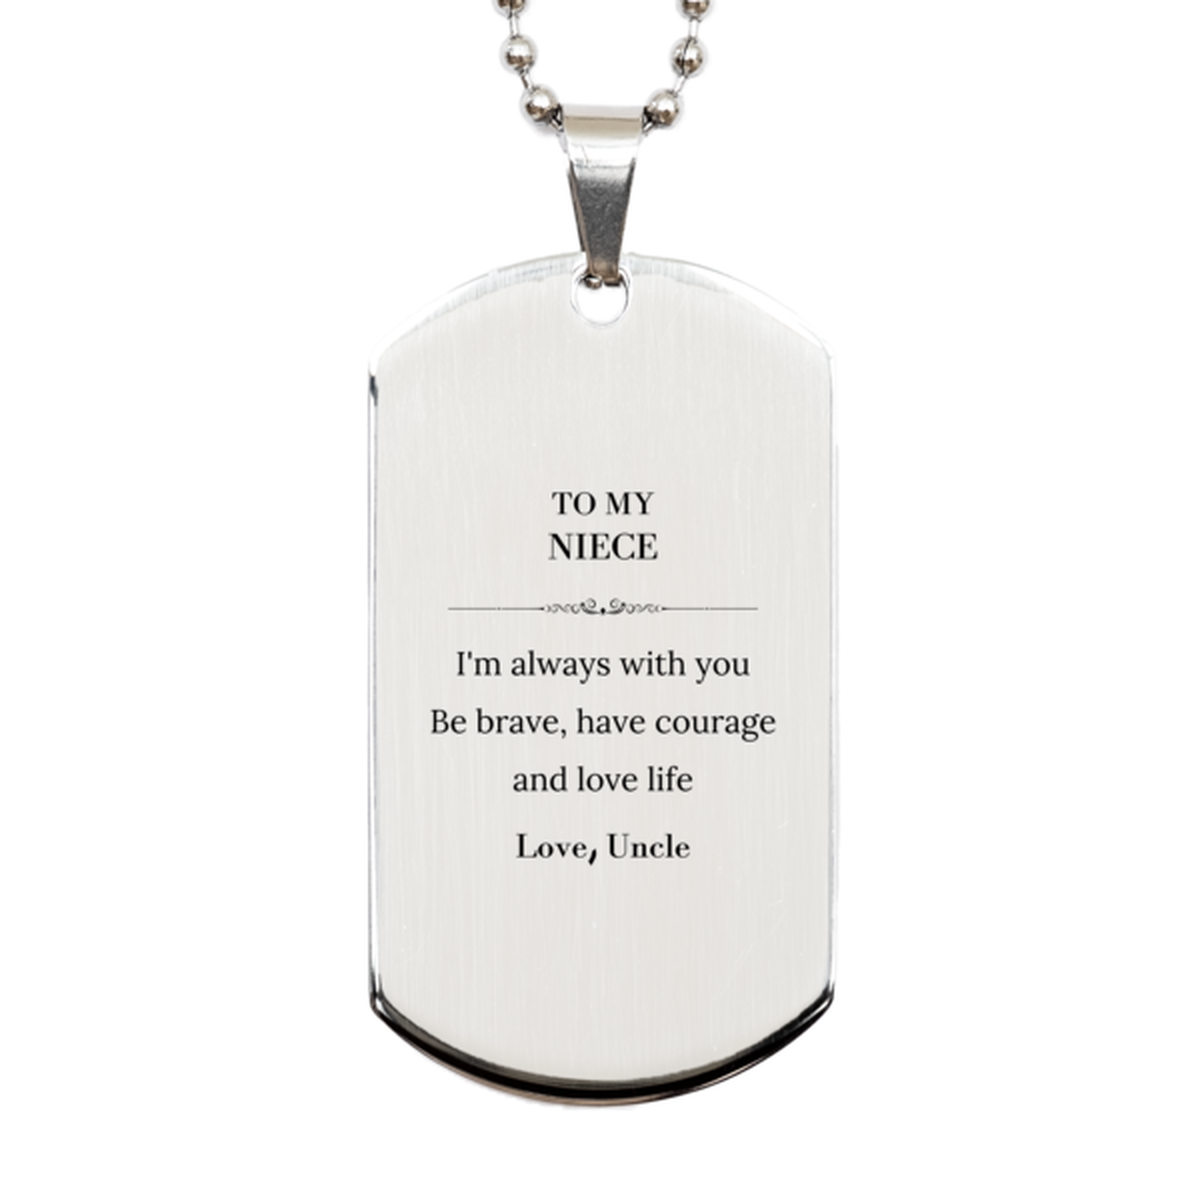 To My Niece Gifts from Uncle, Unique Silver Dog Tag Inspirational Christmas Birthday Graduation Gifts for Niece I'm always with you. Be brave, have courage and love life. Love, Uncle